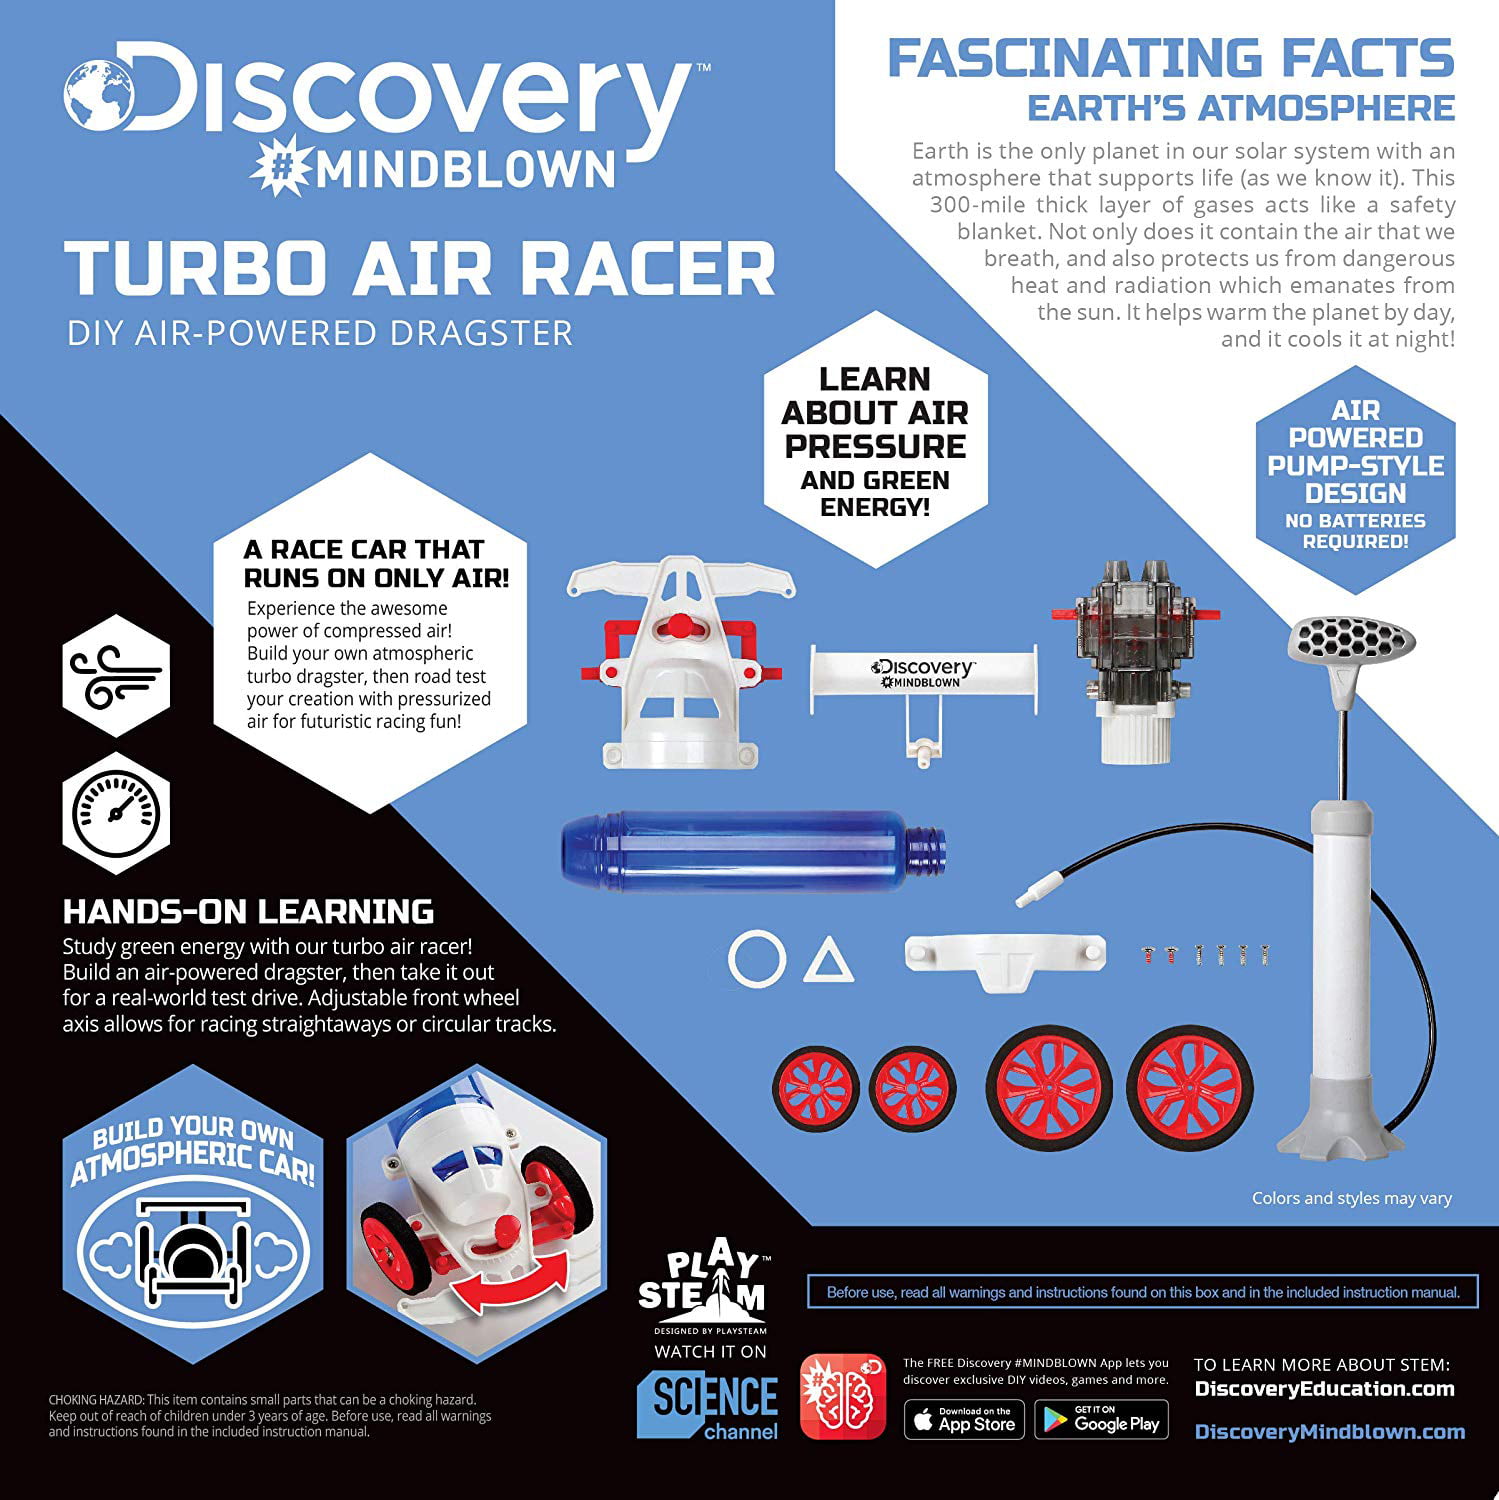 DISCOVERY TURBO AIR RACER DIY AIR-POWERED DRAGSTER KIT 